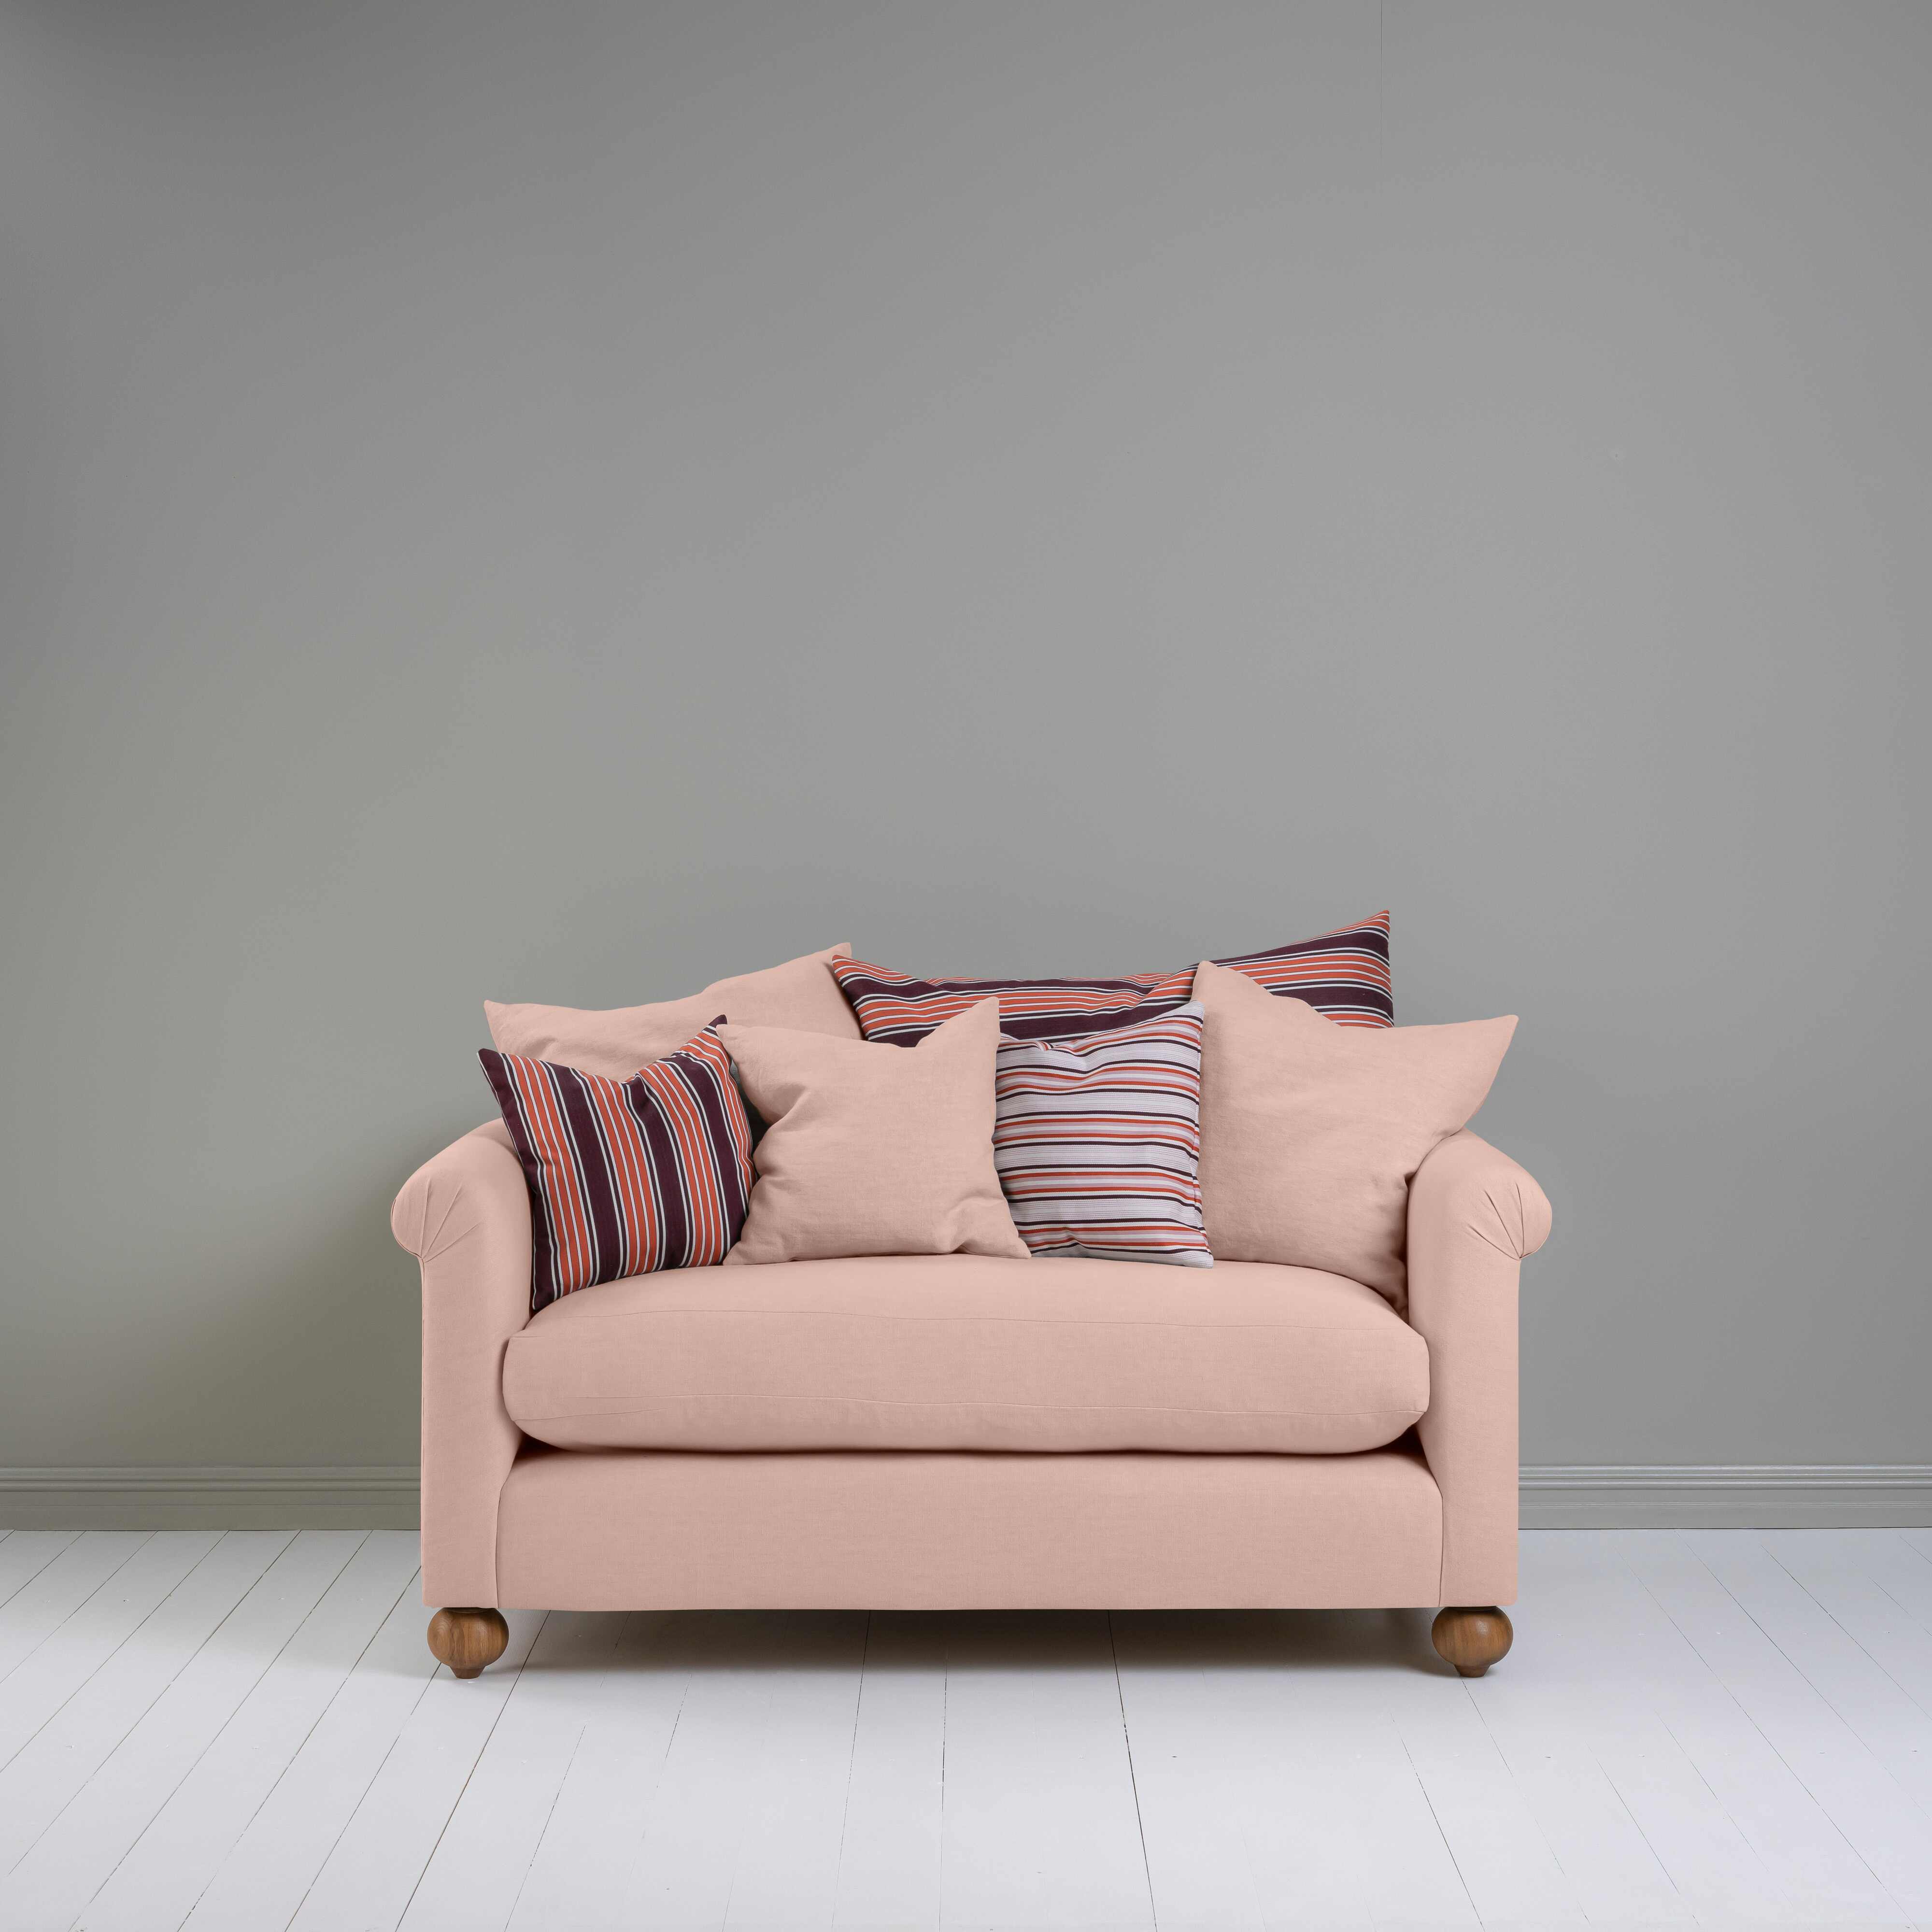  Dolittle 2 Seater Sofa in Laidback Linen Dusky Pink 